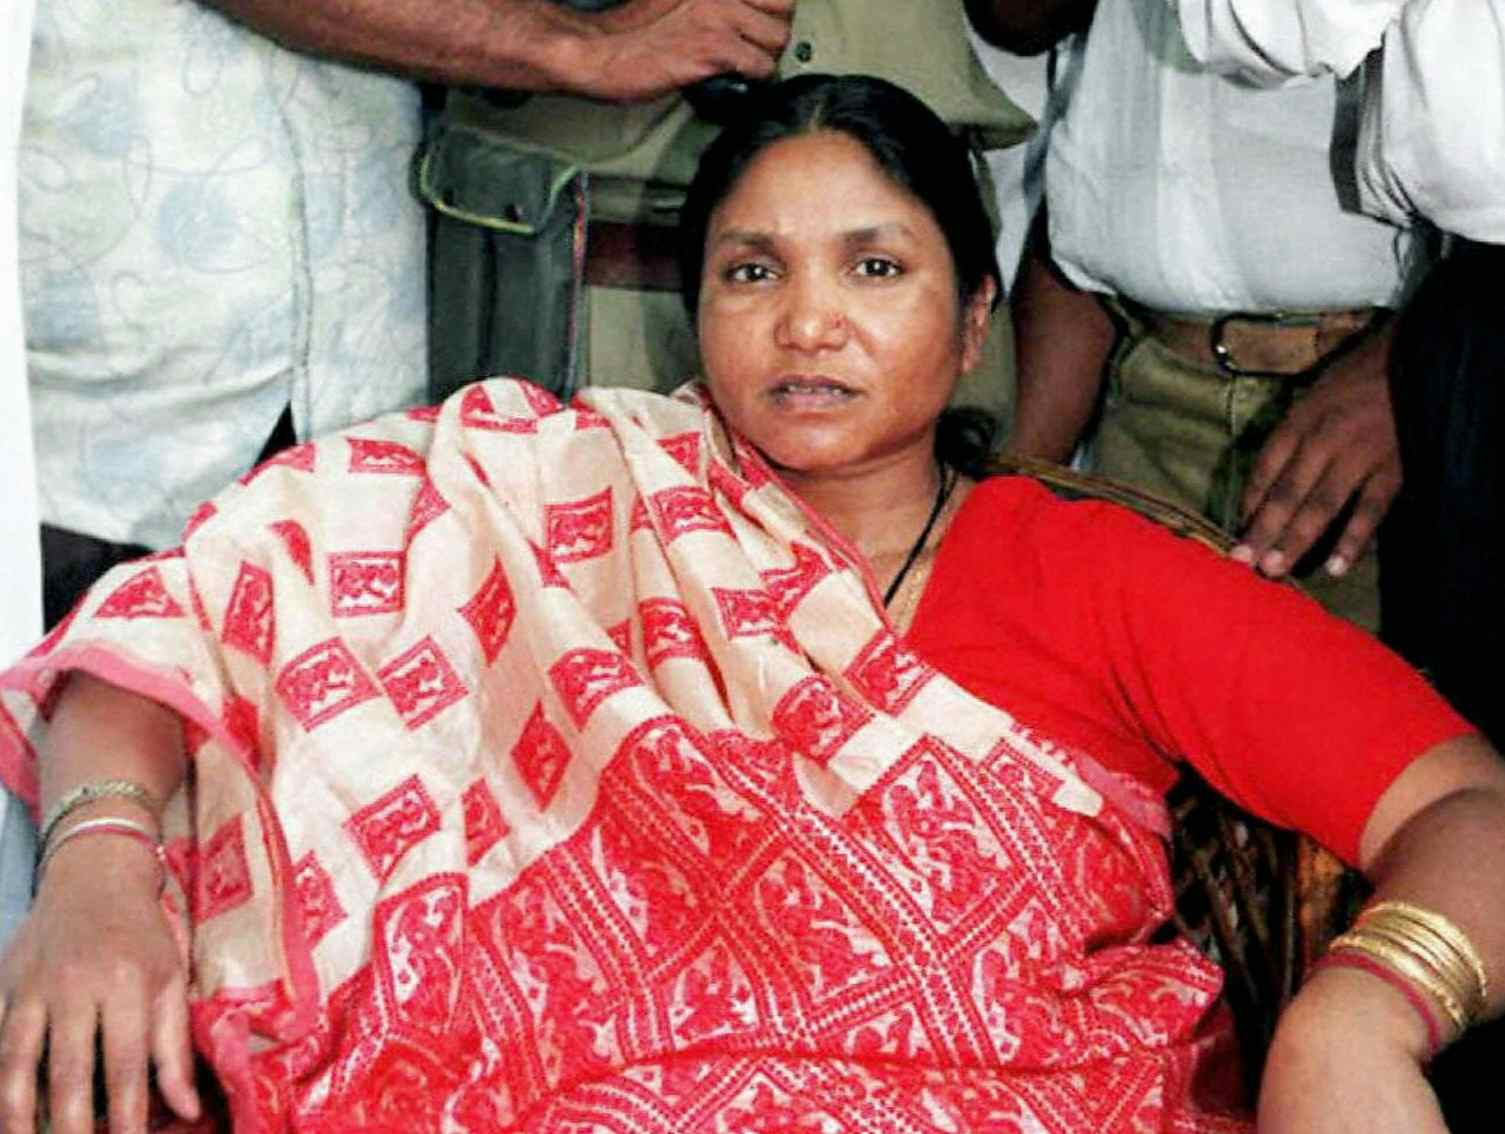 MIRZAPUR, INDIA, 24 April 1996, Phoolan Devi, backed by a bodyguard and supporters, stops during her political campaign to be photographed. (RAVEENDRAN/AFP via Getty Images)